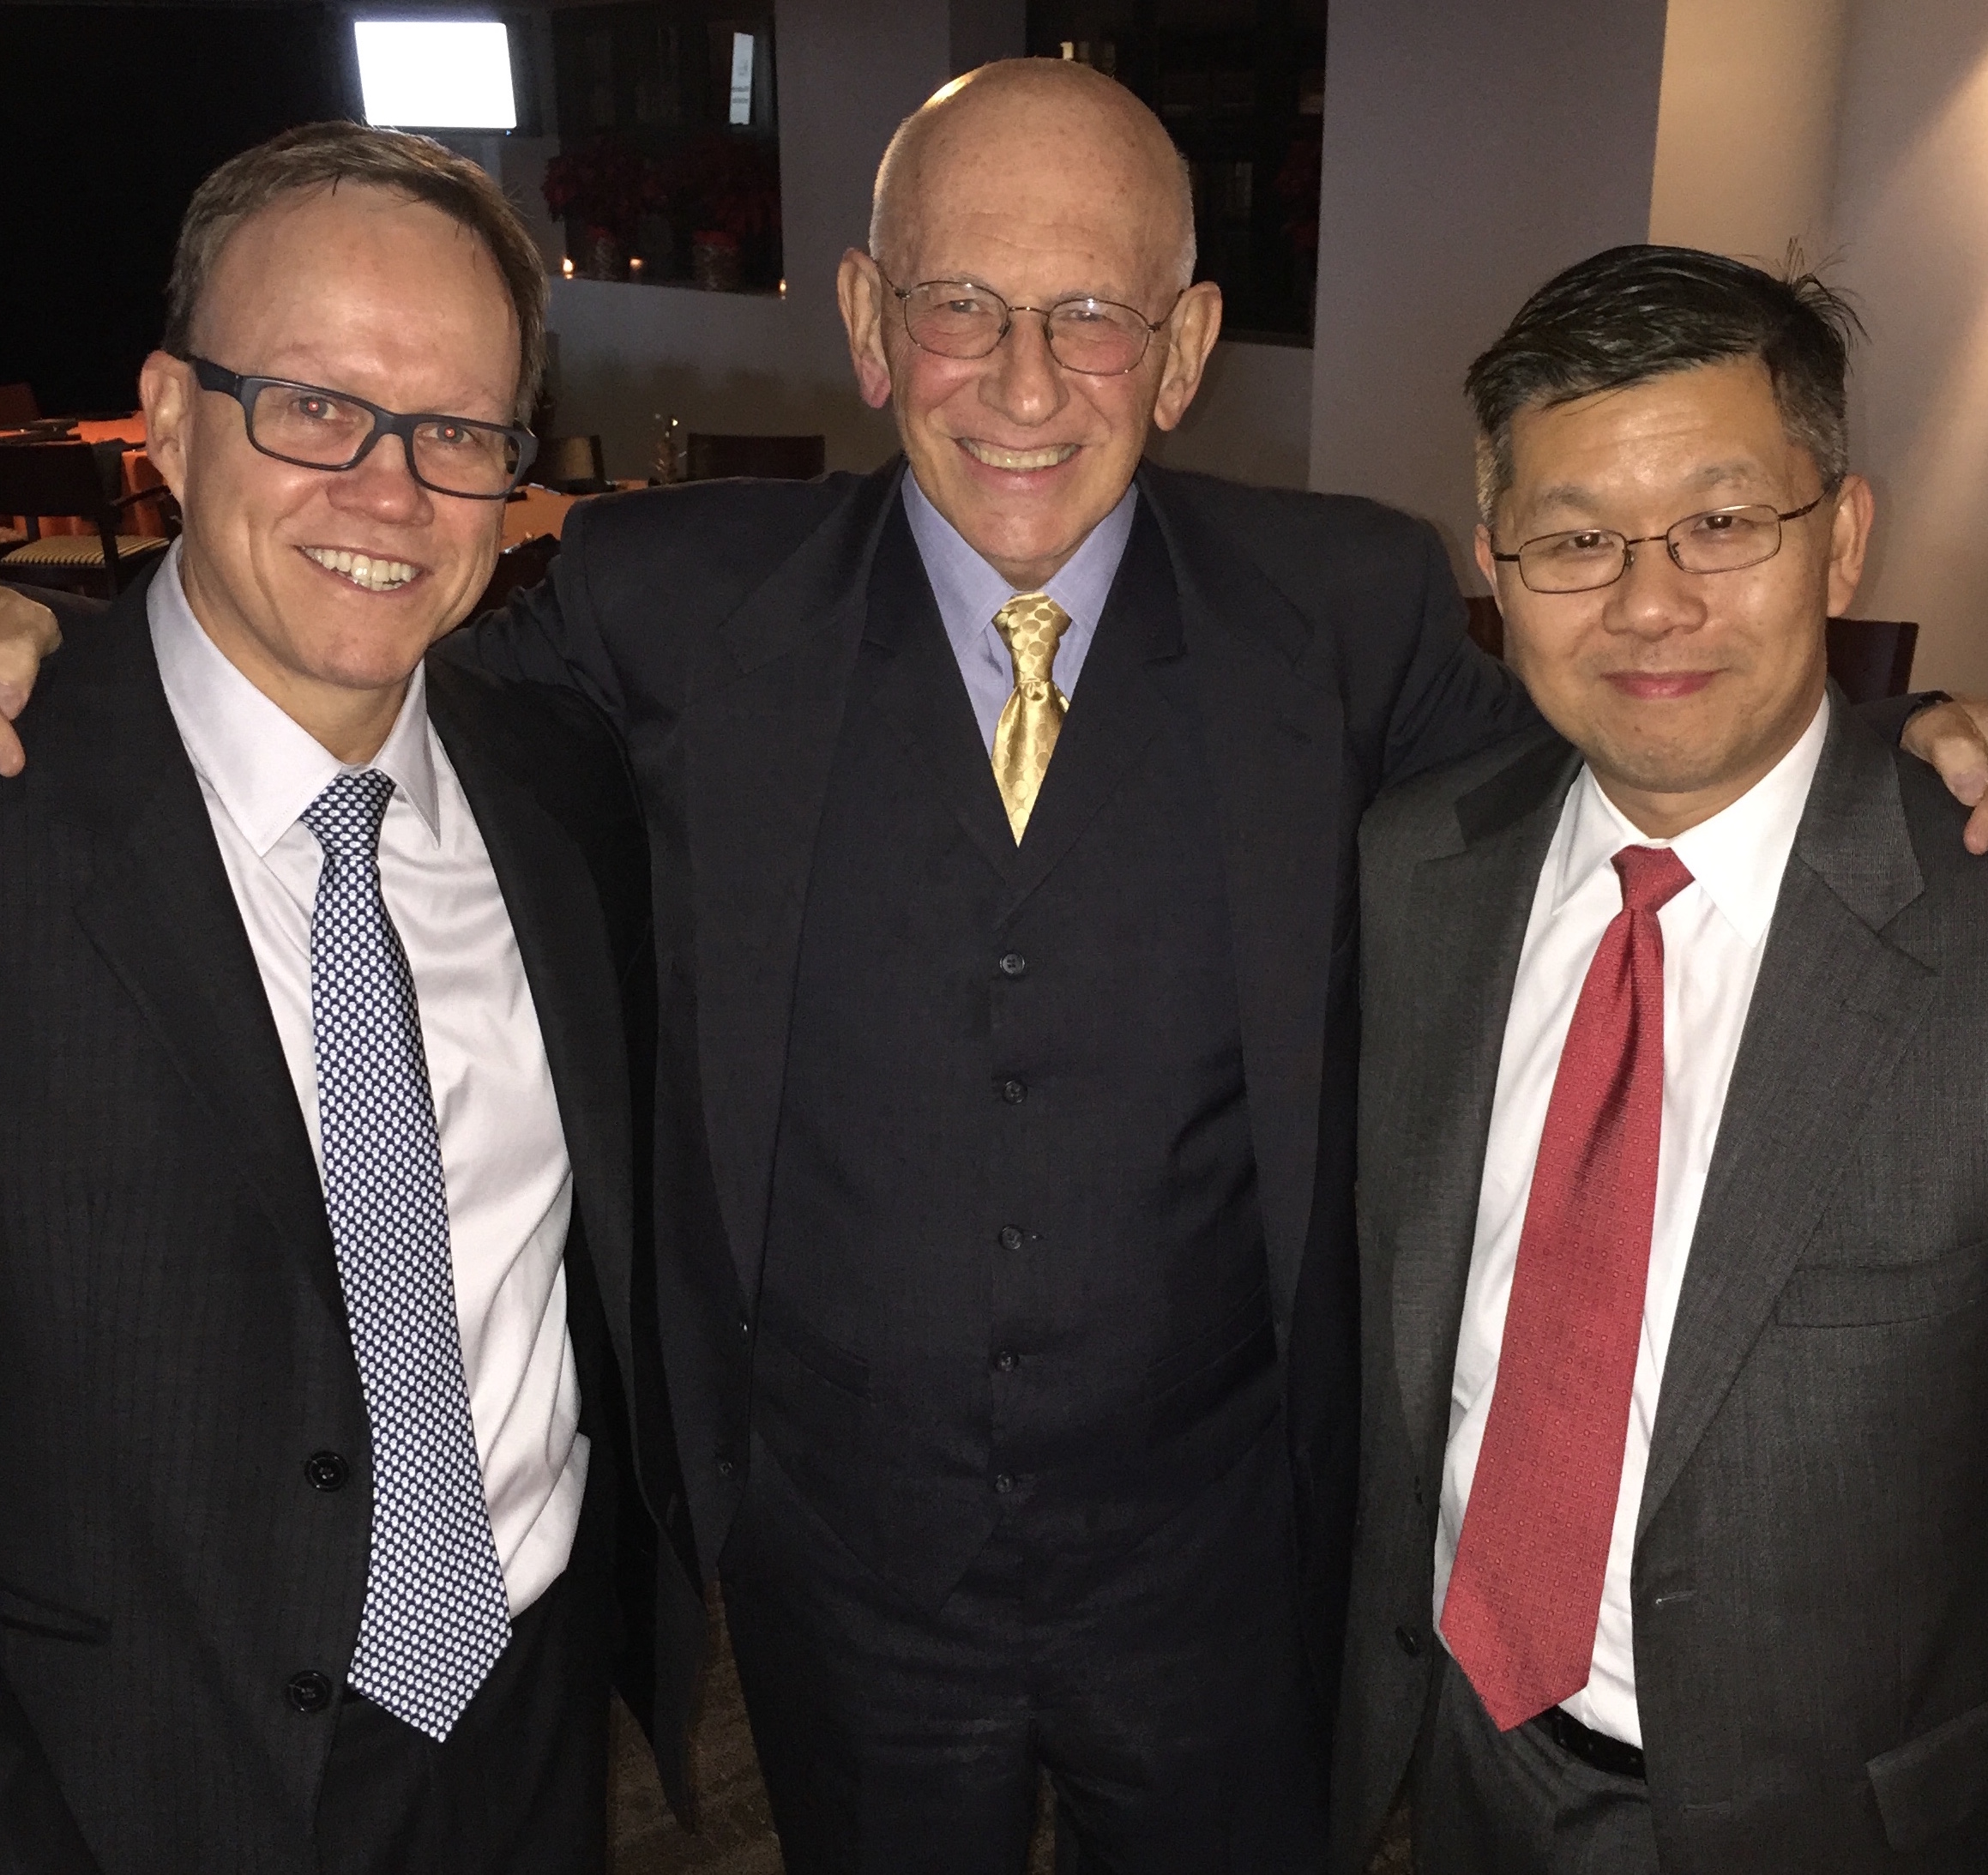 Dr. Darrell Cass, Dr. William Schecter and Dr. Edward Chen